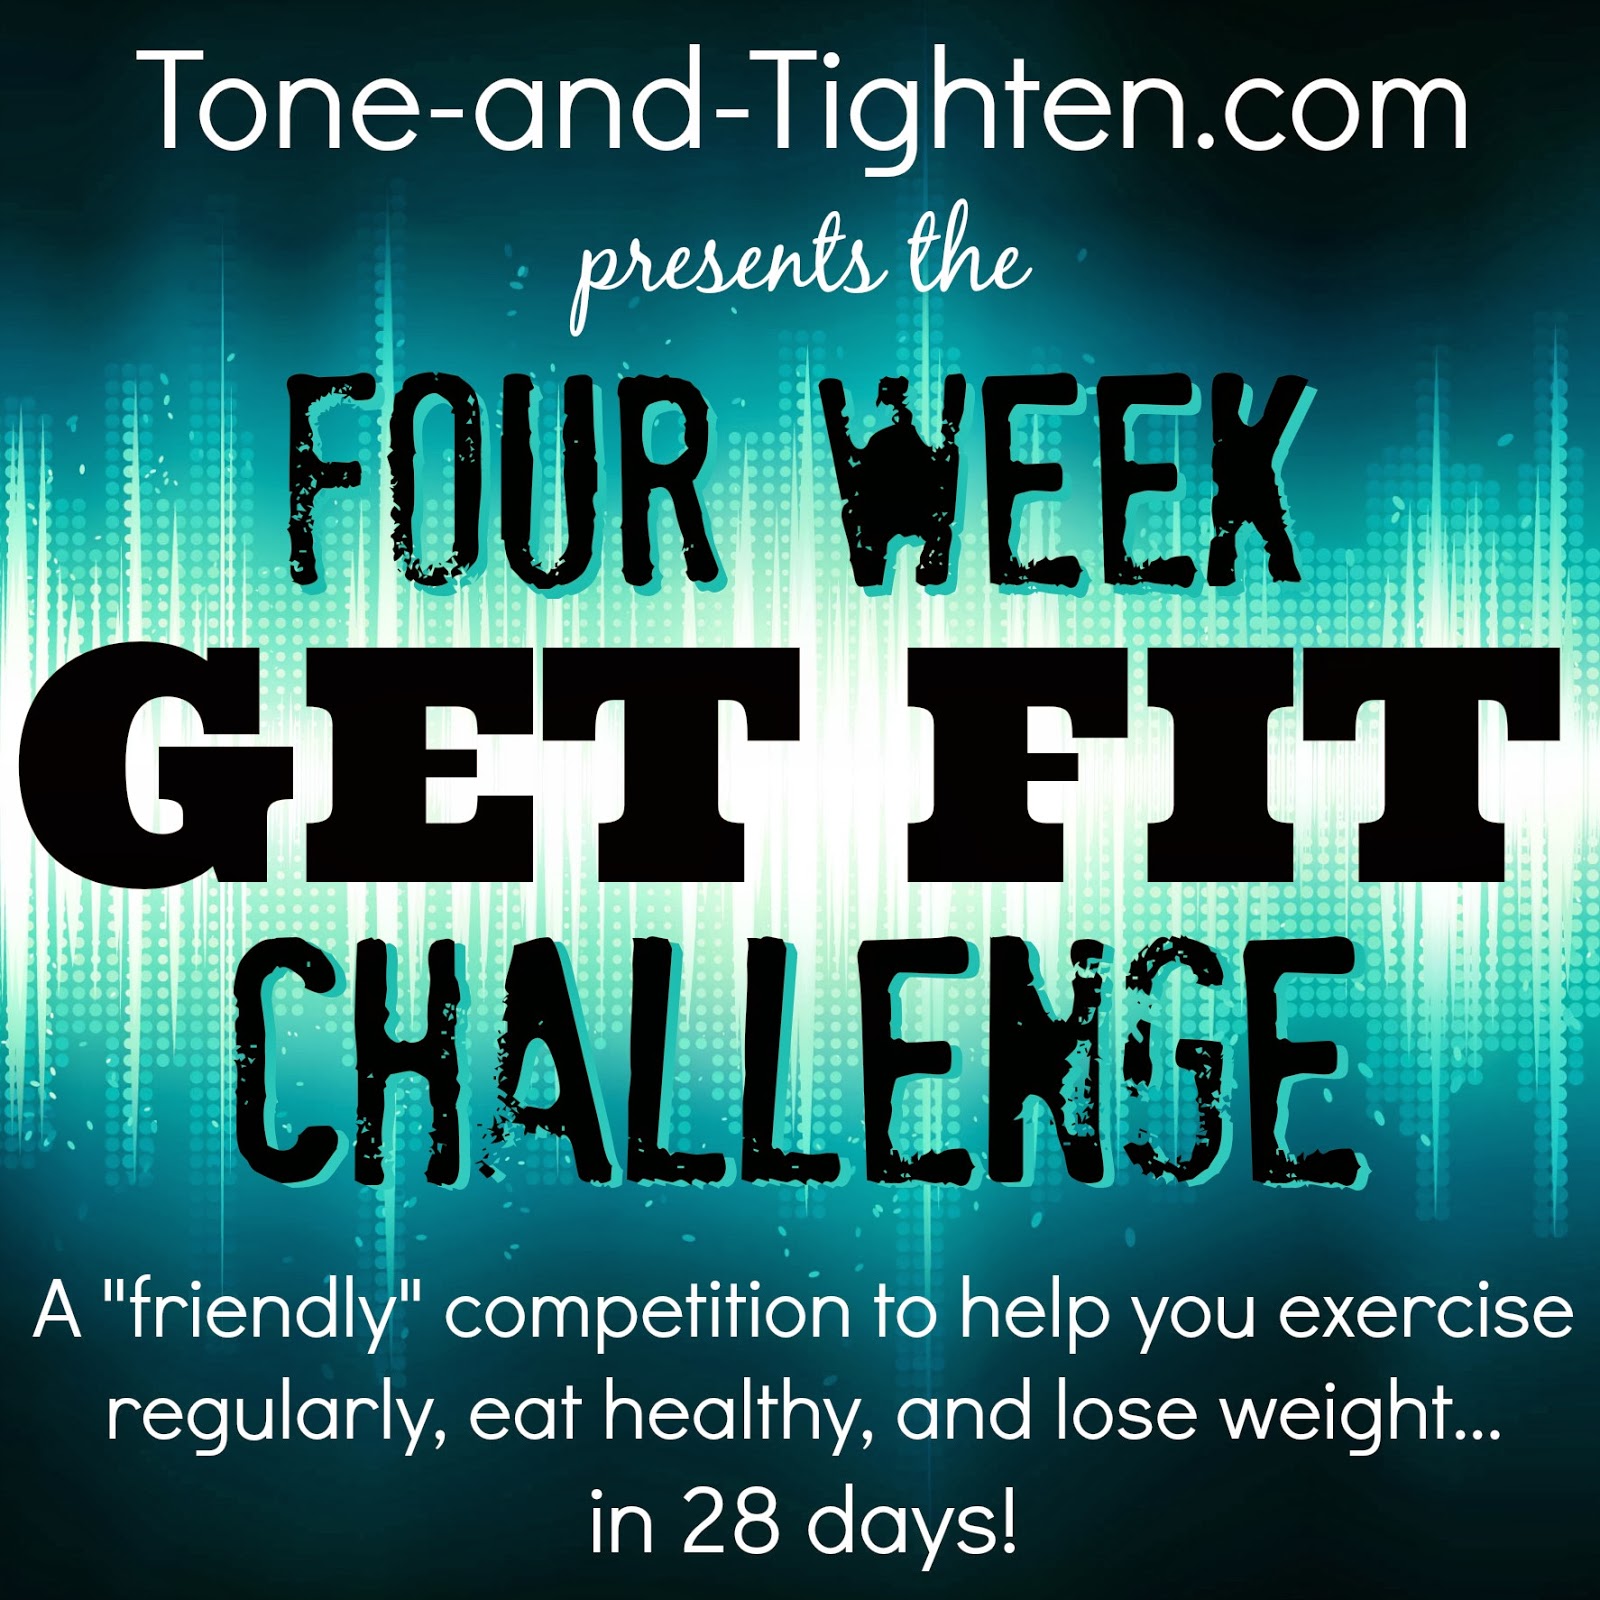 Four Week Get Fit Challenge from Tone-and-Tighten.com